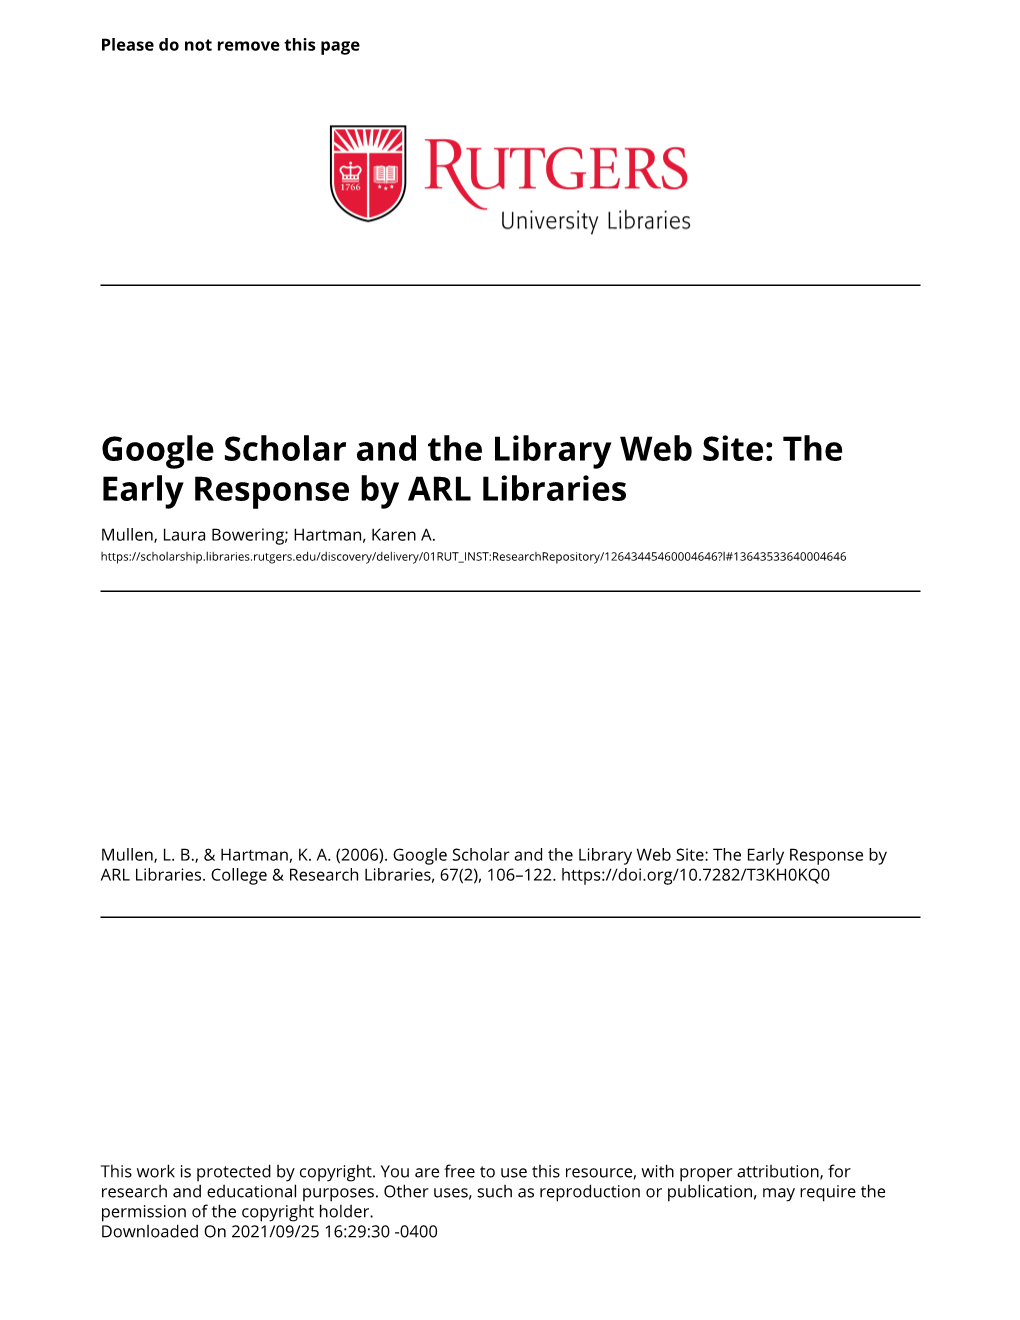 The Early Response by ARL Libraries